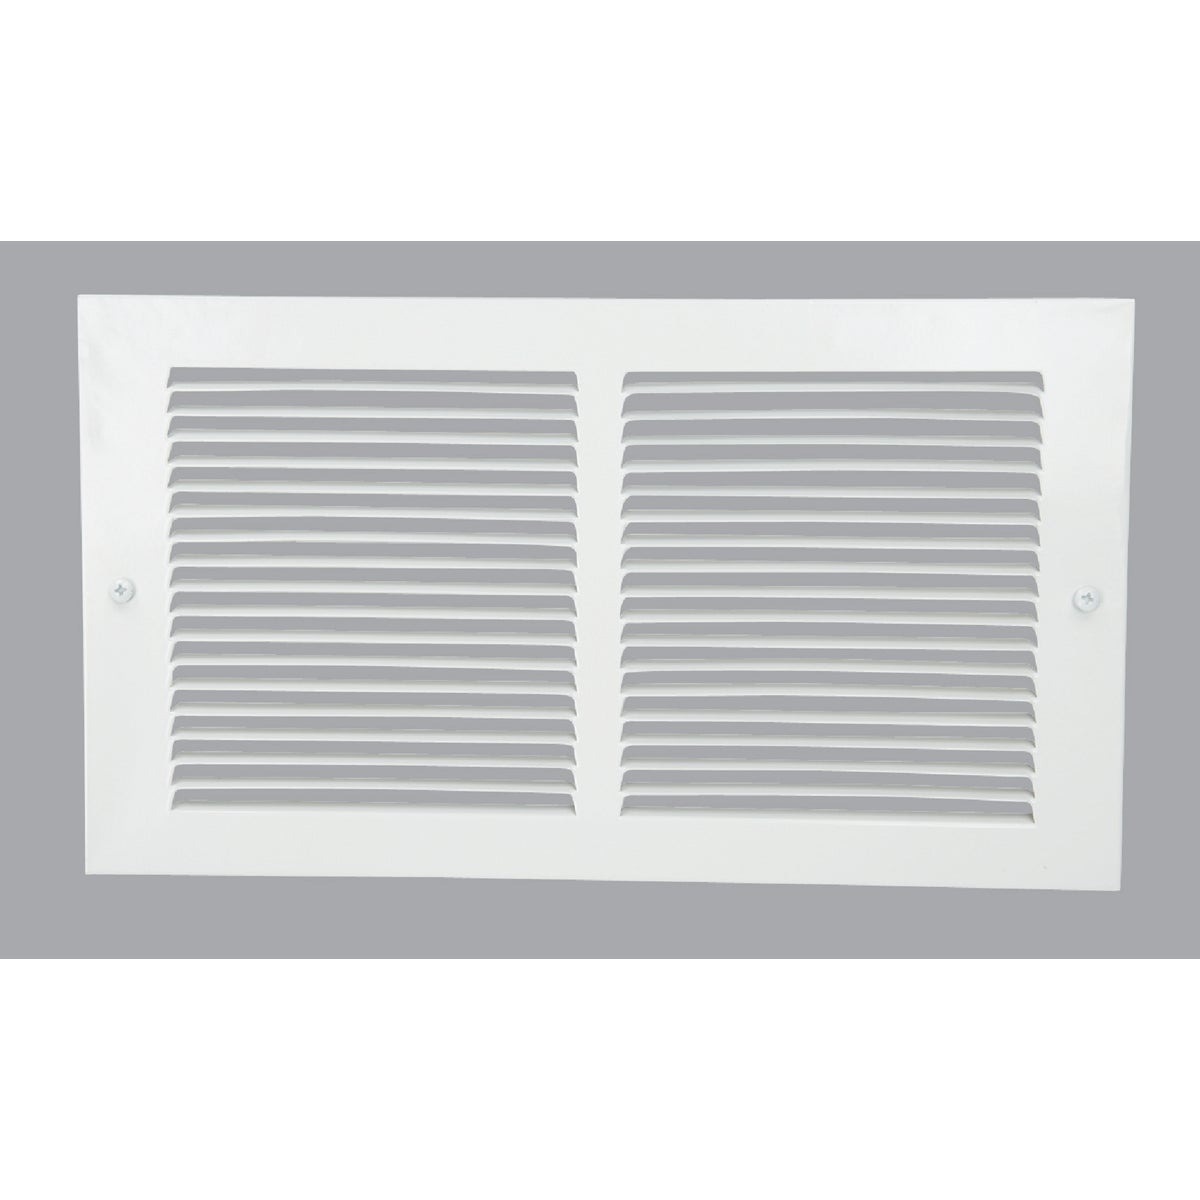 Home Impressions 6 In. x 12 In. White Steel Baseboard Grille